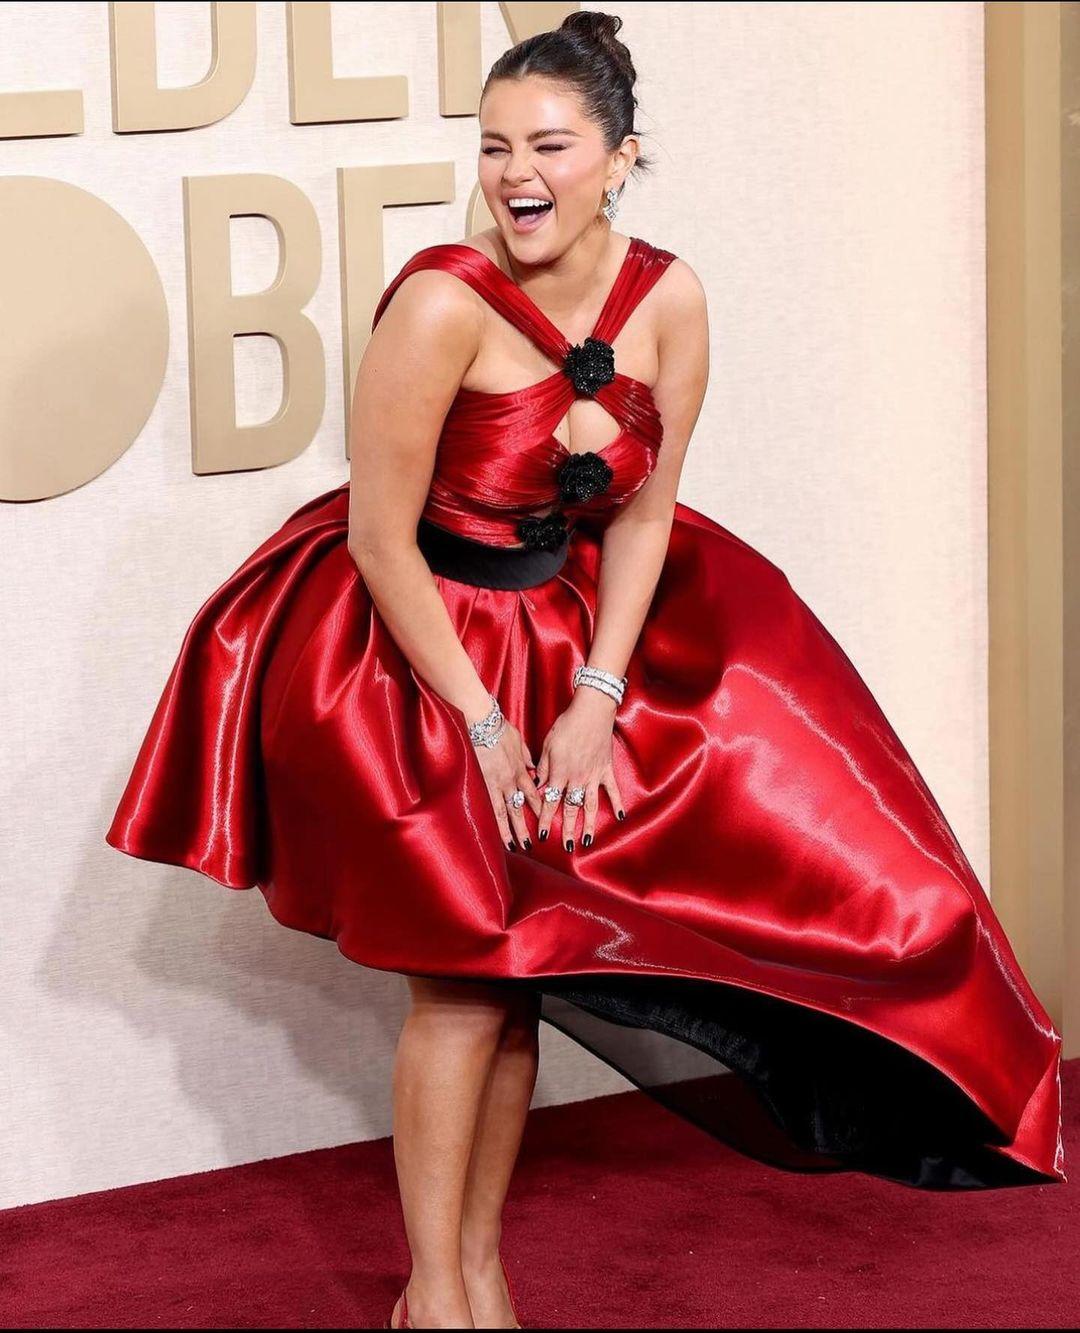 Probably one of the funniest and cutest part from the night. Selena, while posing on the red carpet had a Marilyn Monroe moment